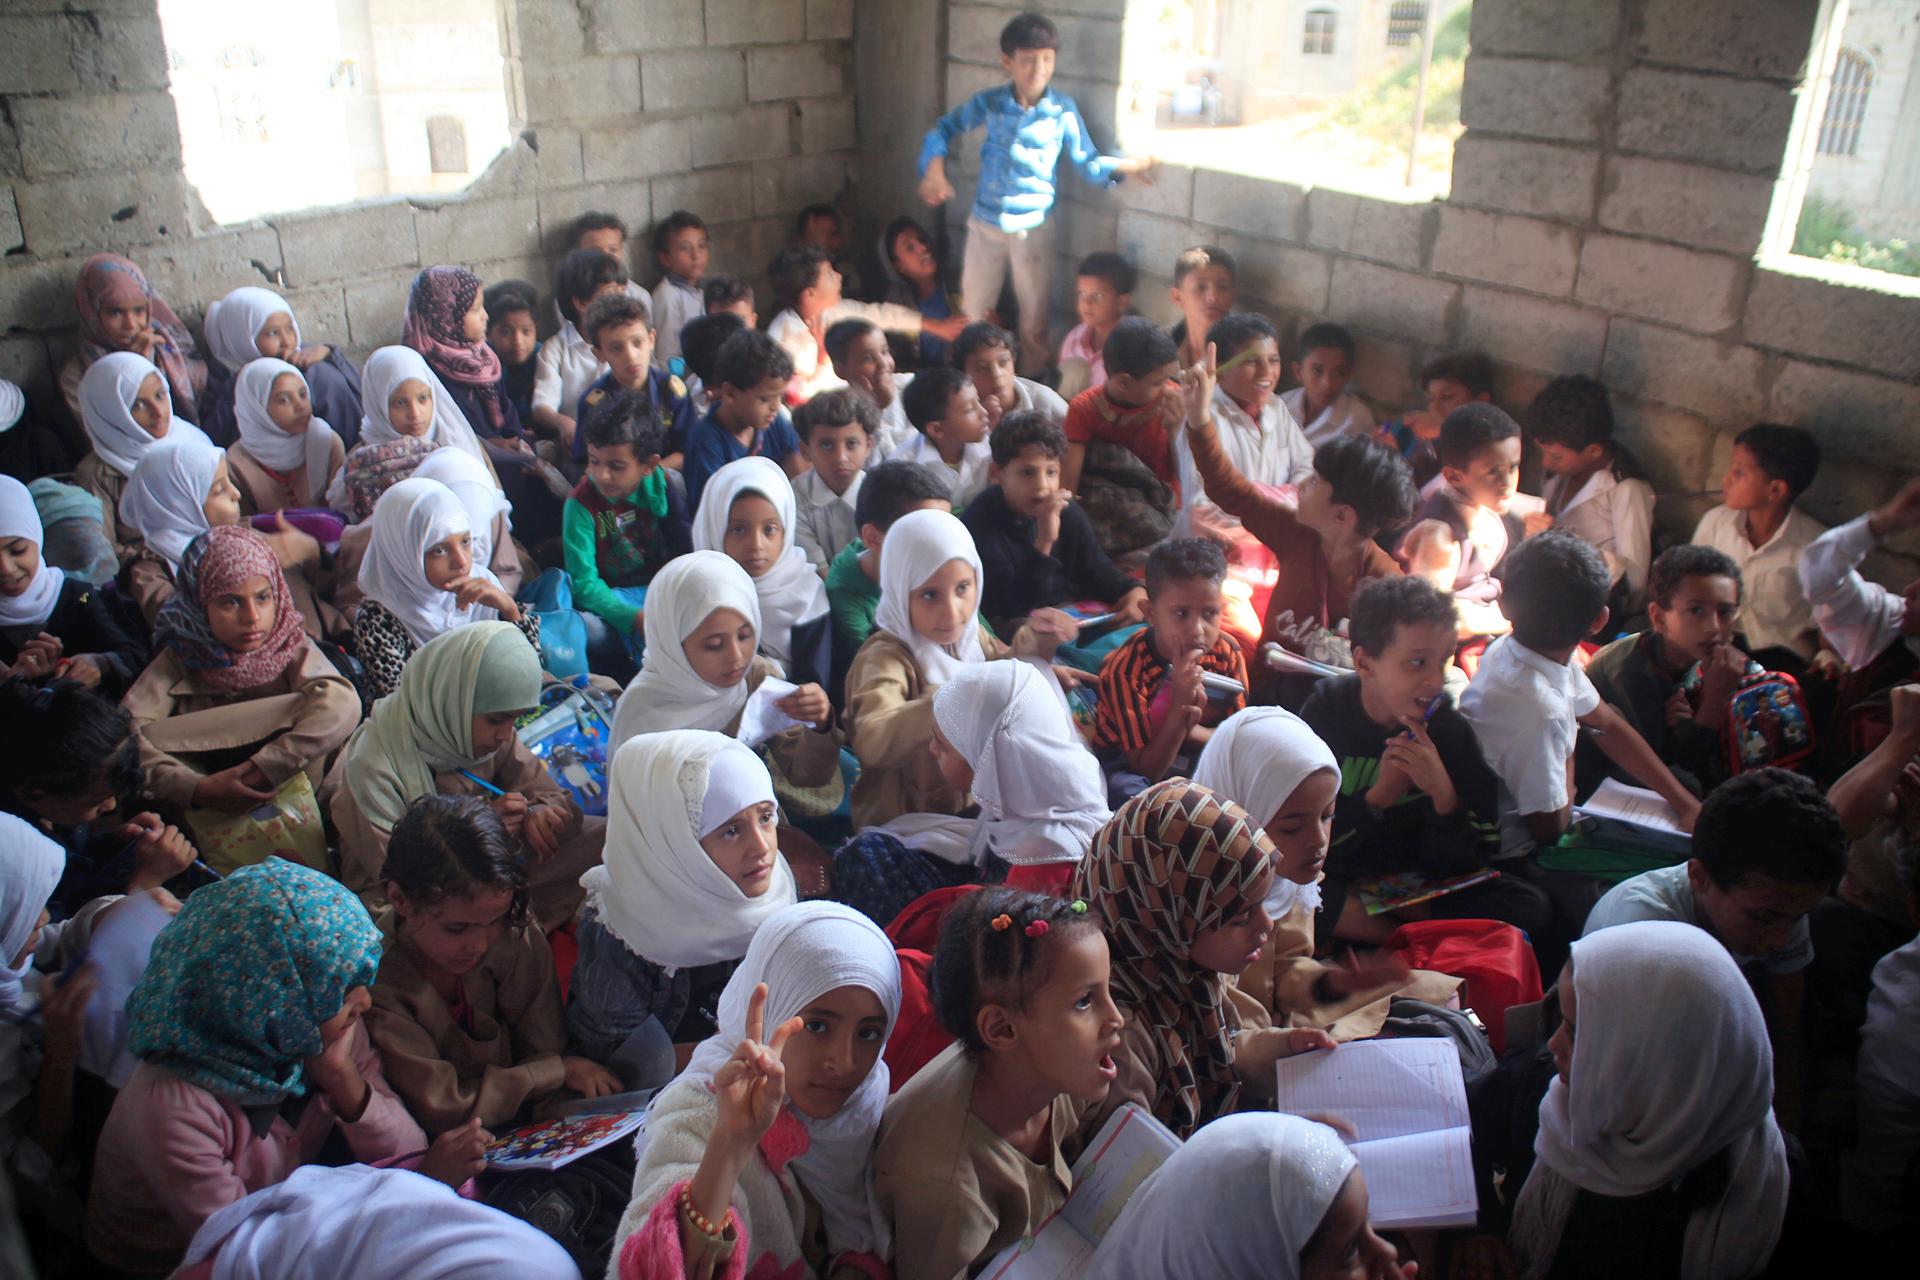 Students attend a class at the teacher's house, who turned it into a makeshift free school that hosts 700 students, in Taiz, Yemen October 18, 2018.